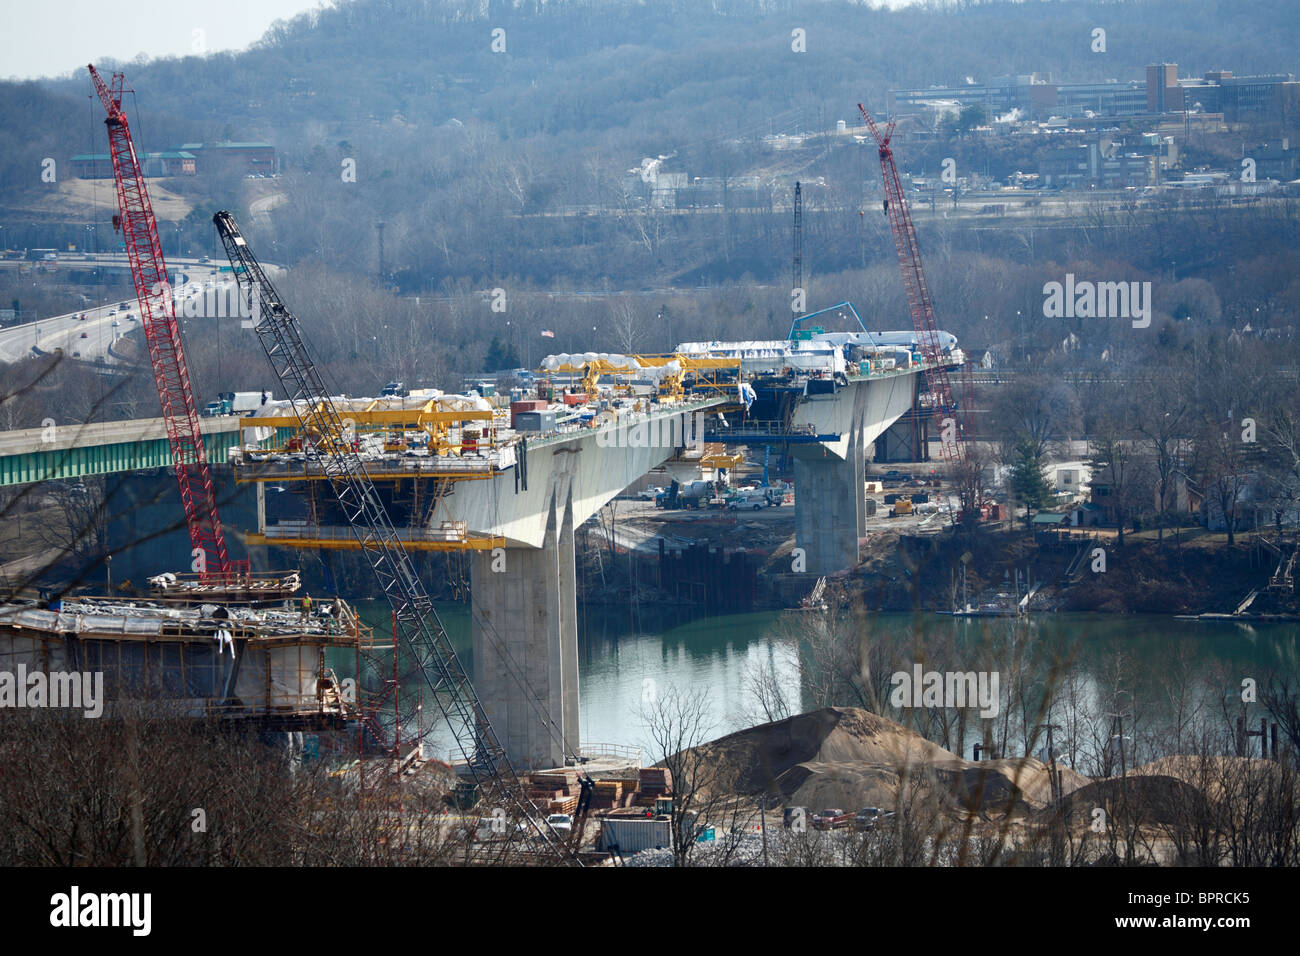 Eye-level view of the new I64 bridge under construction over the Kanawha River in downtown Charleston, WV. Stock Photo